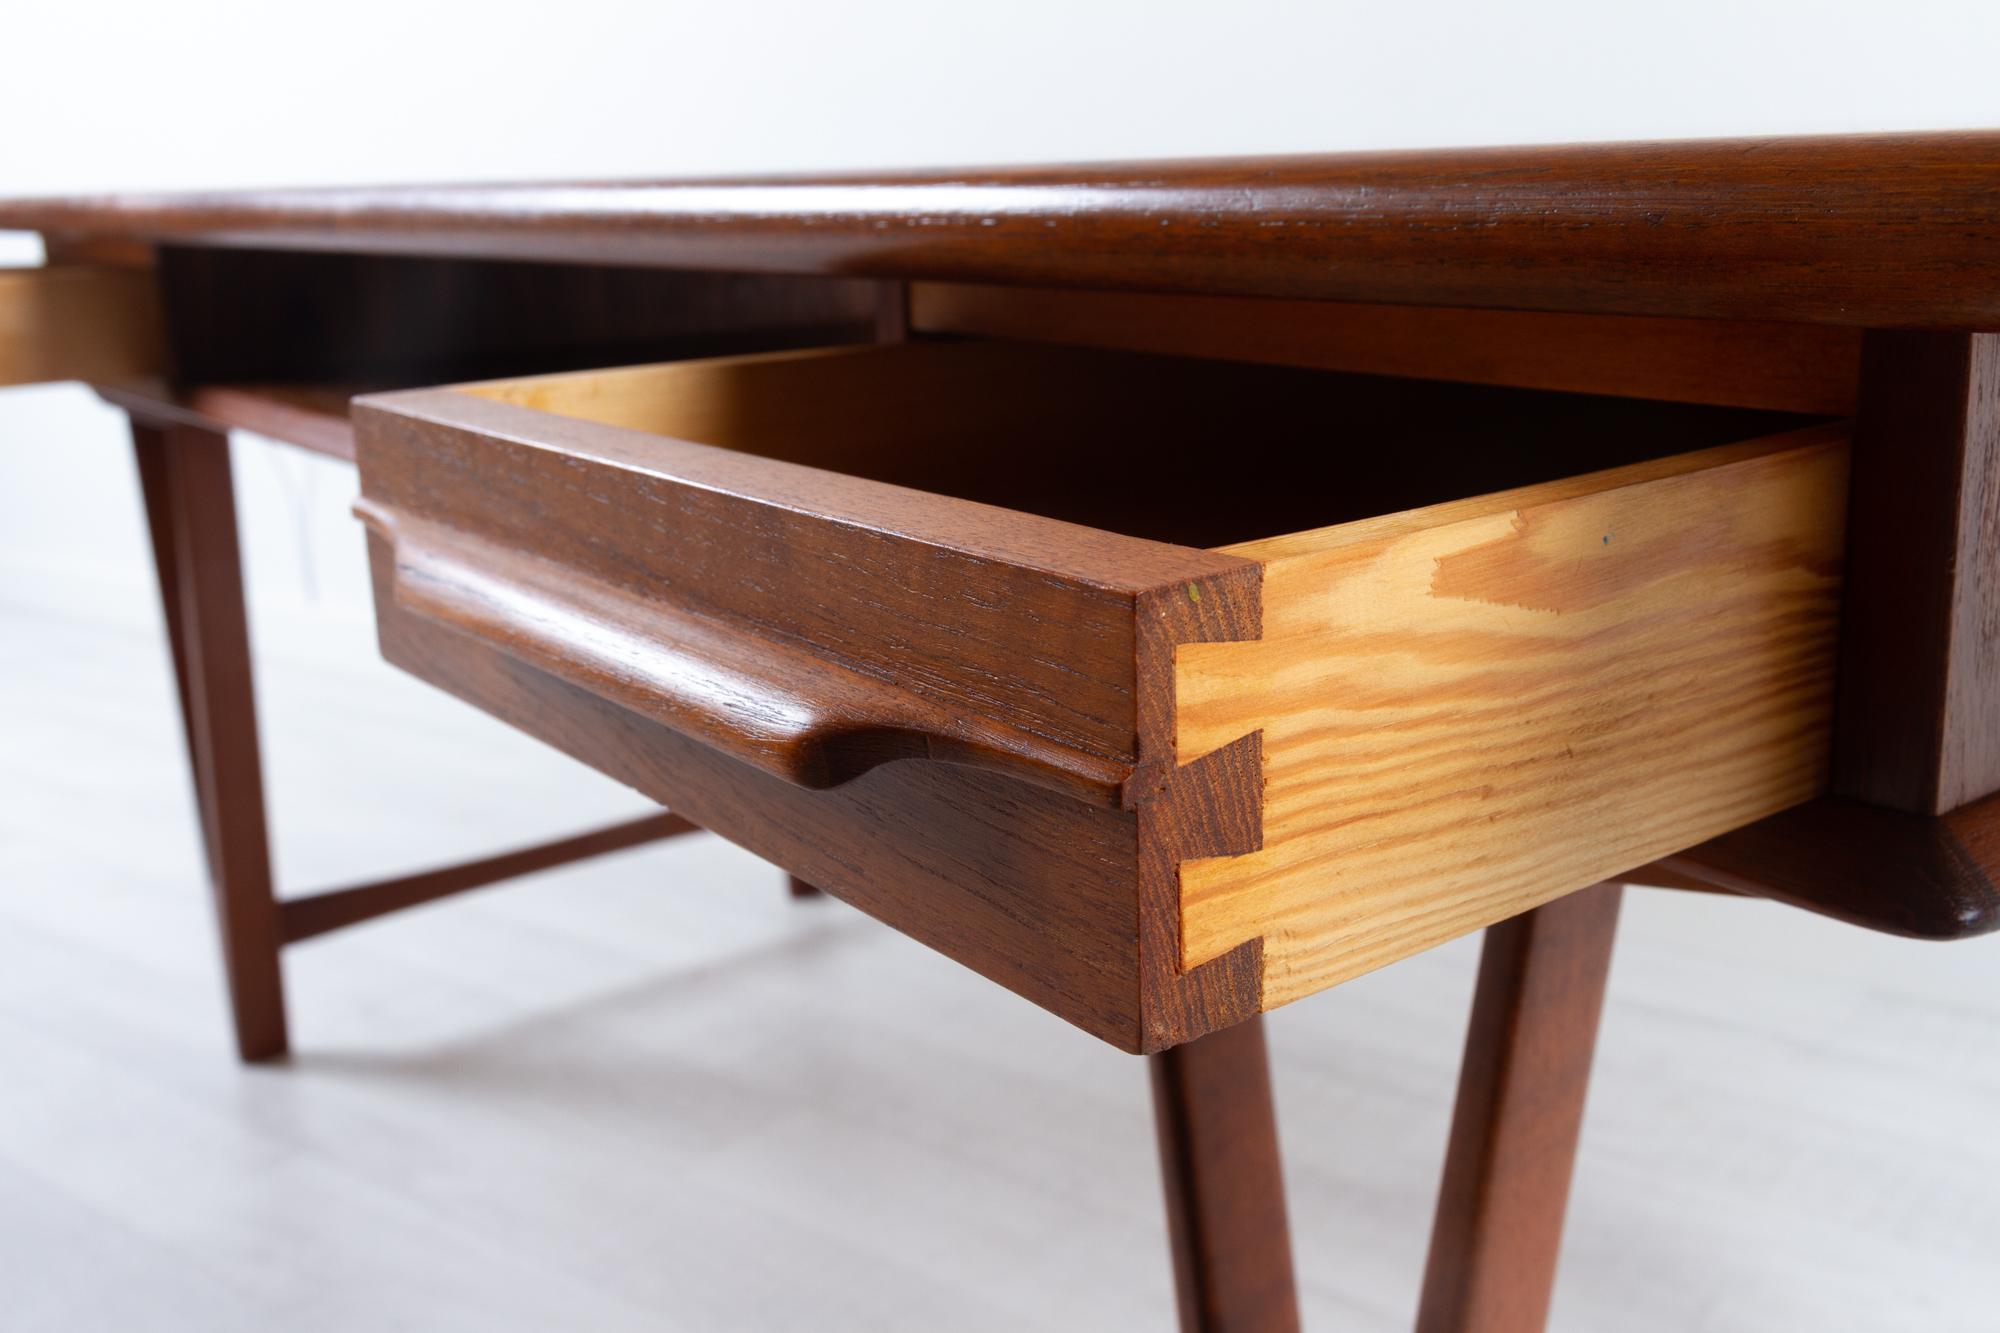 Vintage Danish Teak Coffee Table by E.W. Bach 1960s For Sale 6